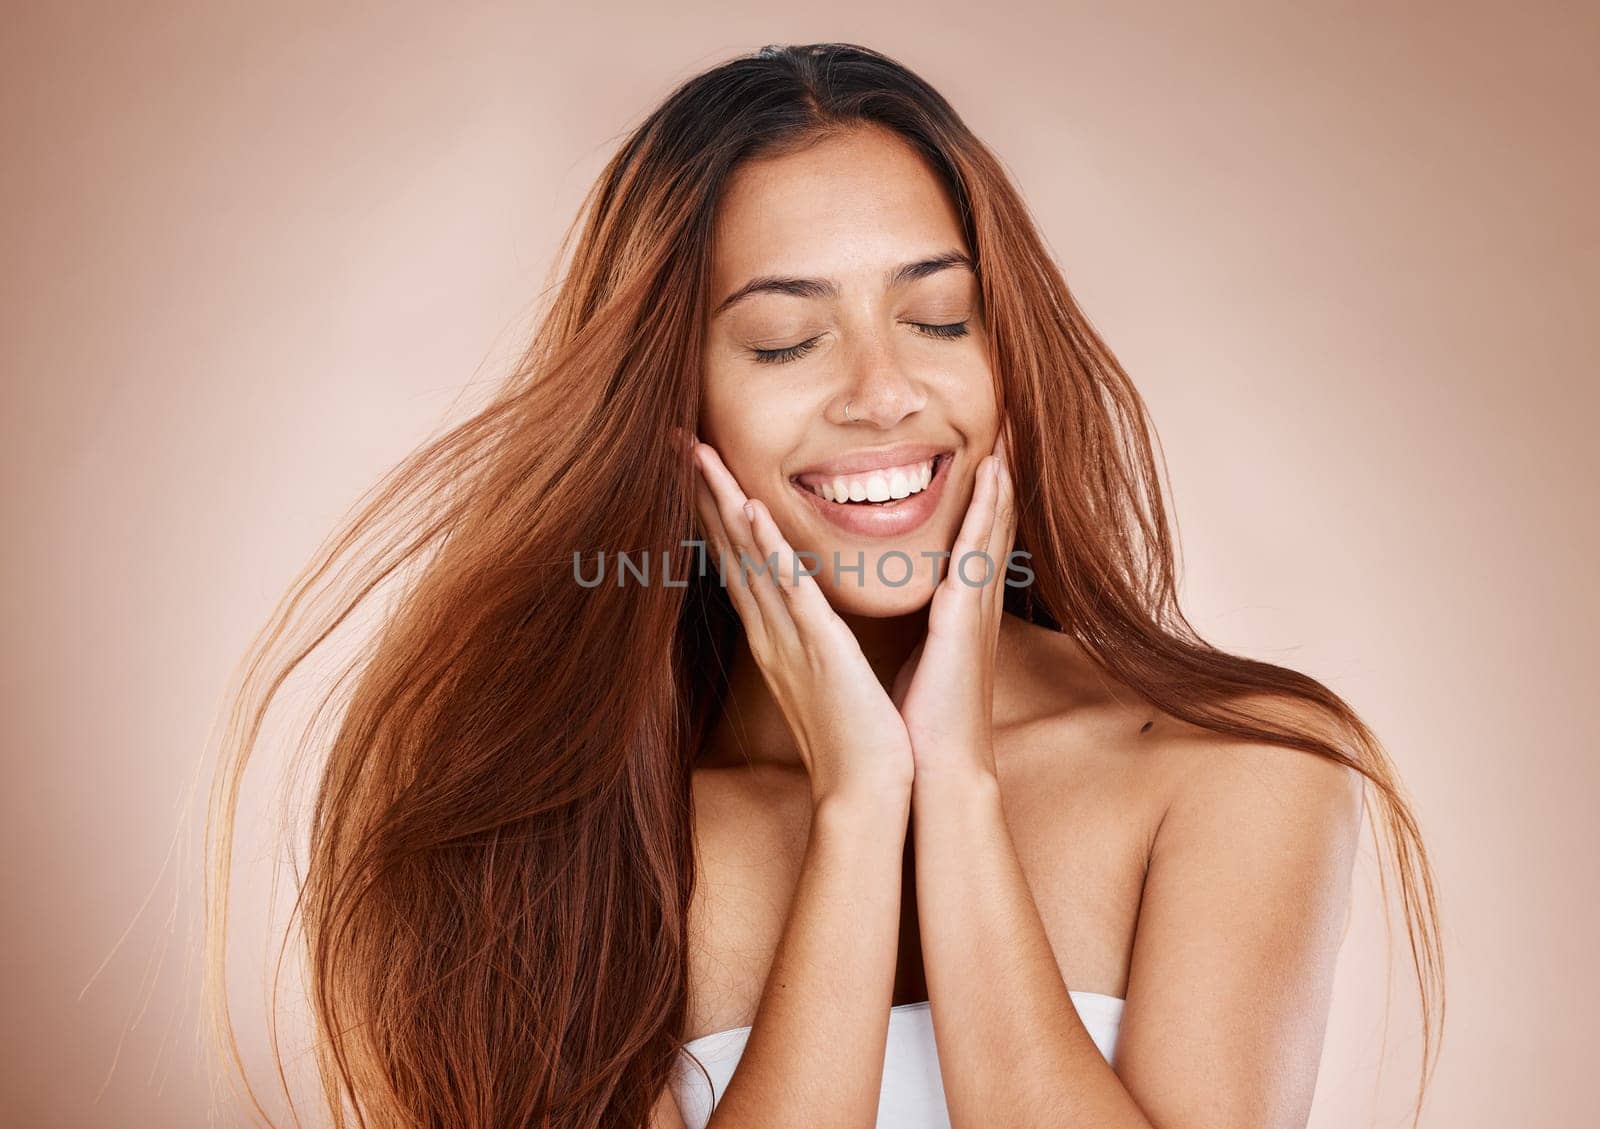 Beauty, hair care and face of woman with eyes closed in studio on brown background. Skincare, makeup cosmetics or female model satisfied with salon treatment for balayage hairstyle, growth or texture.